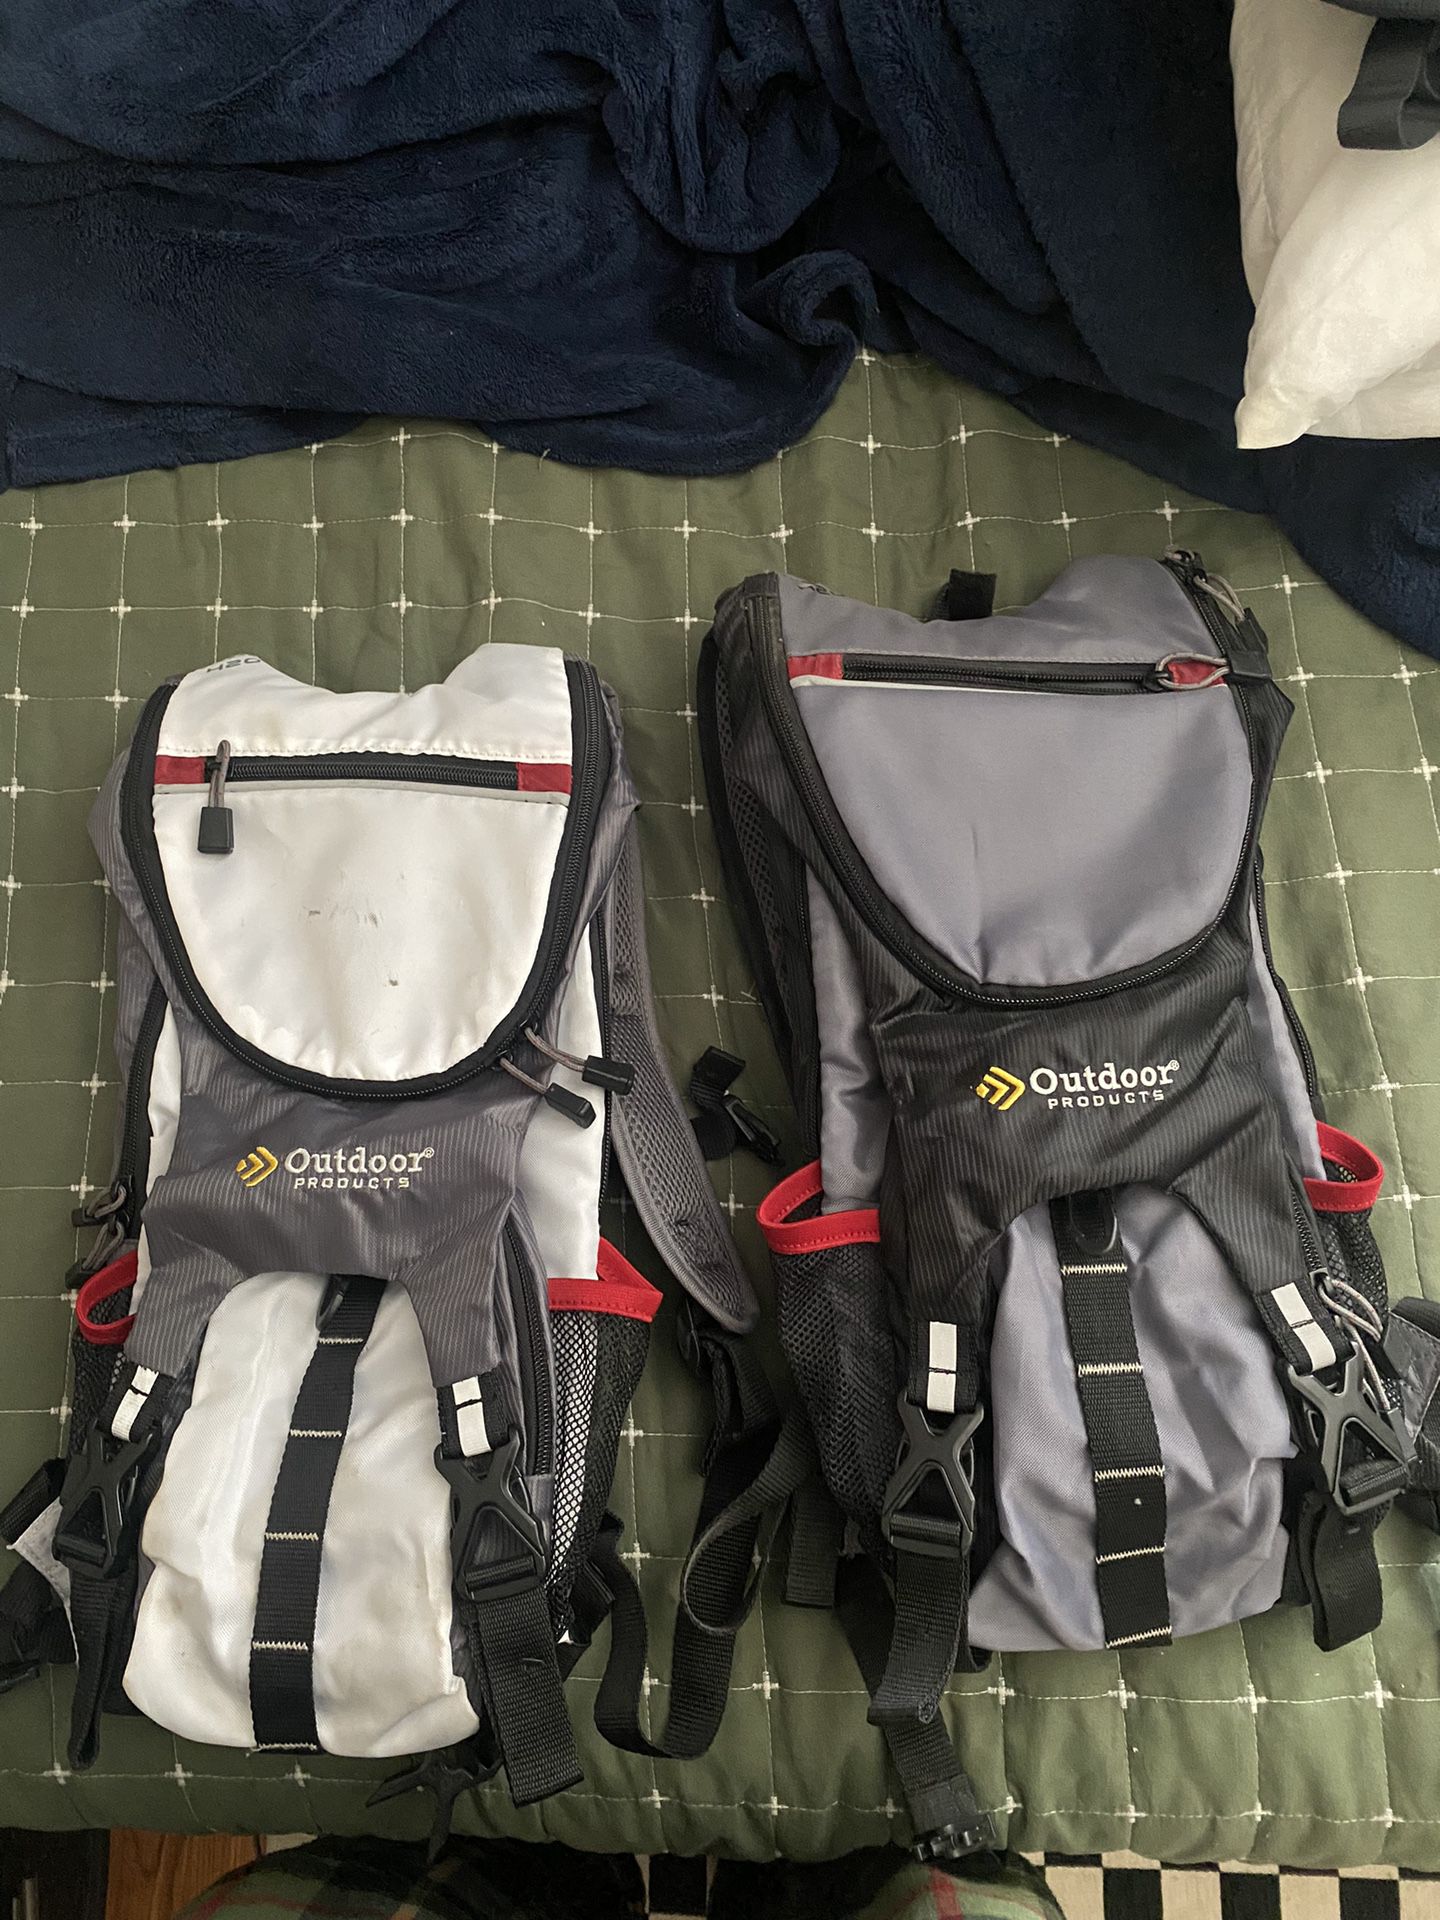 Outdoor Products Ripcord Hydration Packs  (NOT FOR FREE READ DESCRIPTION BELOW)